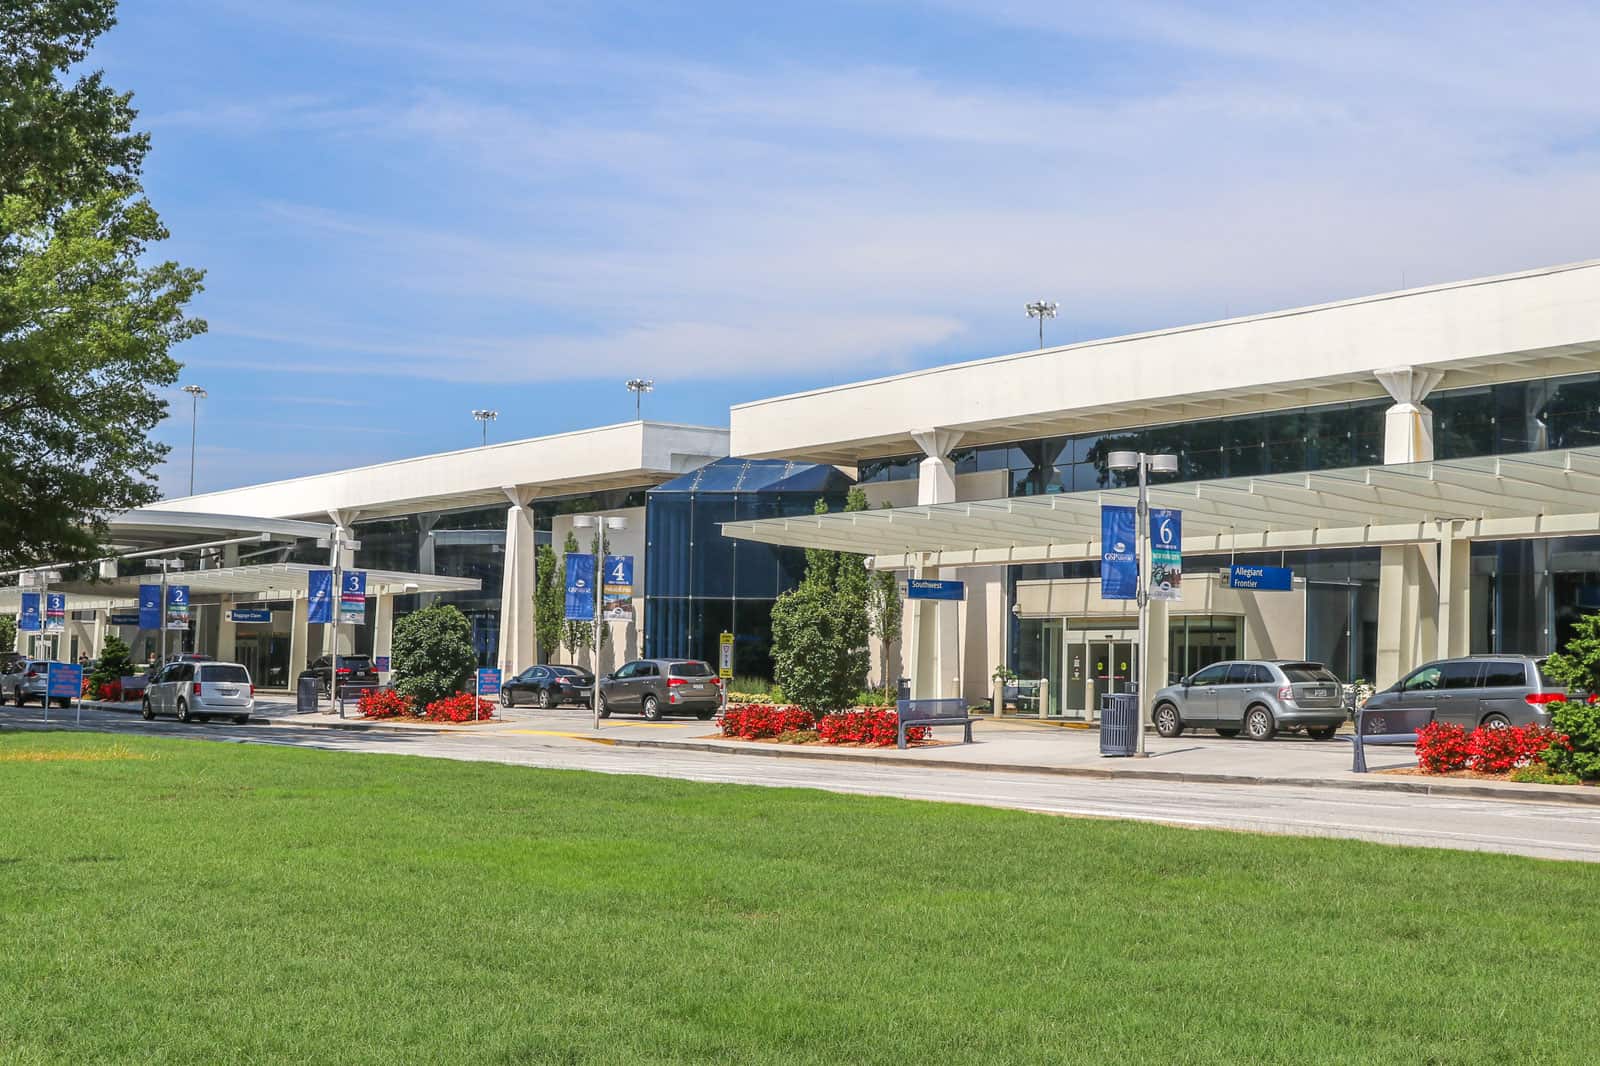 GSP airport outside terminal